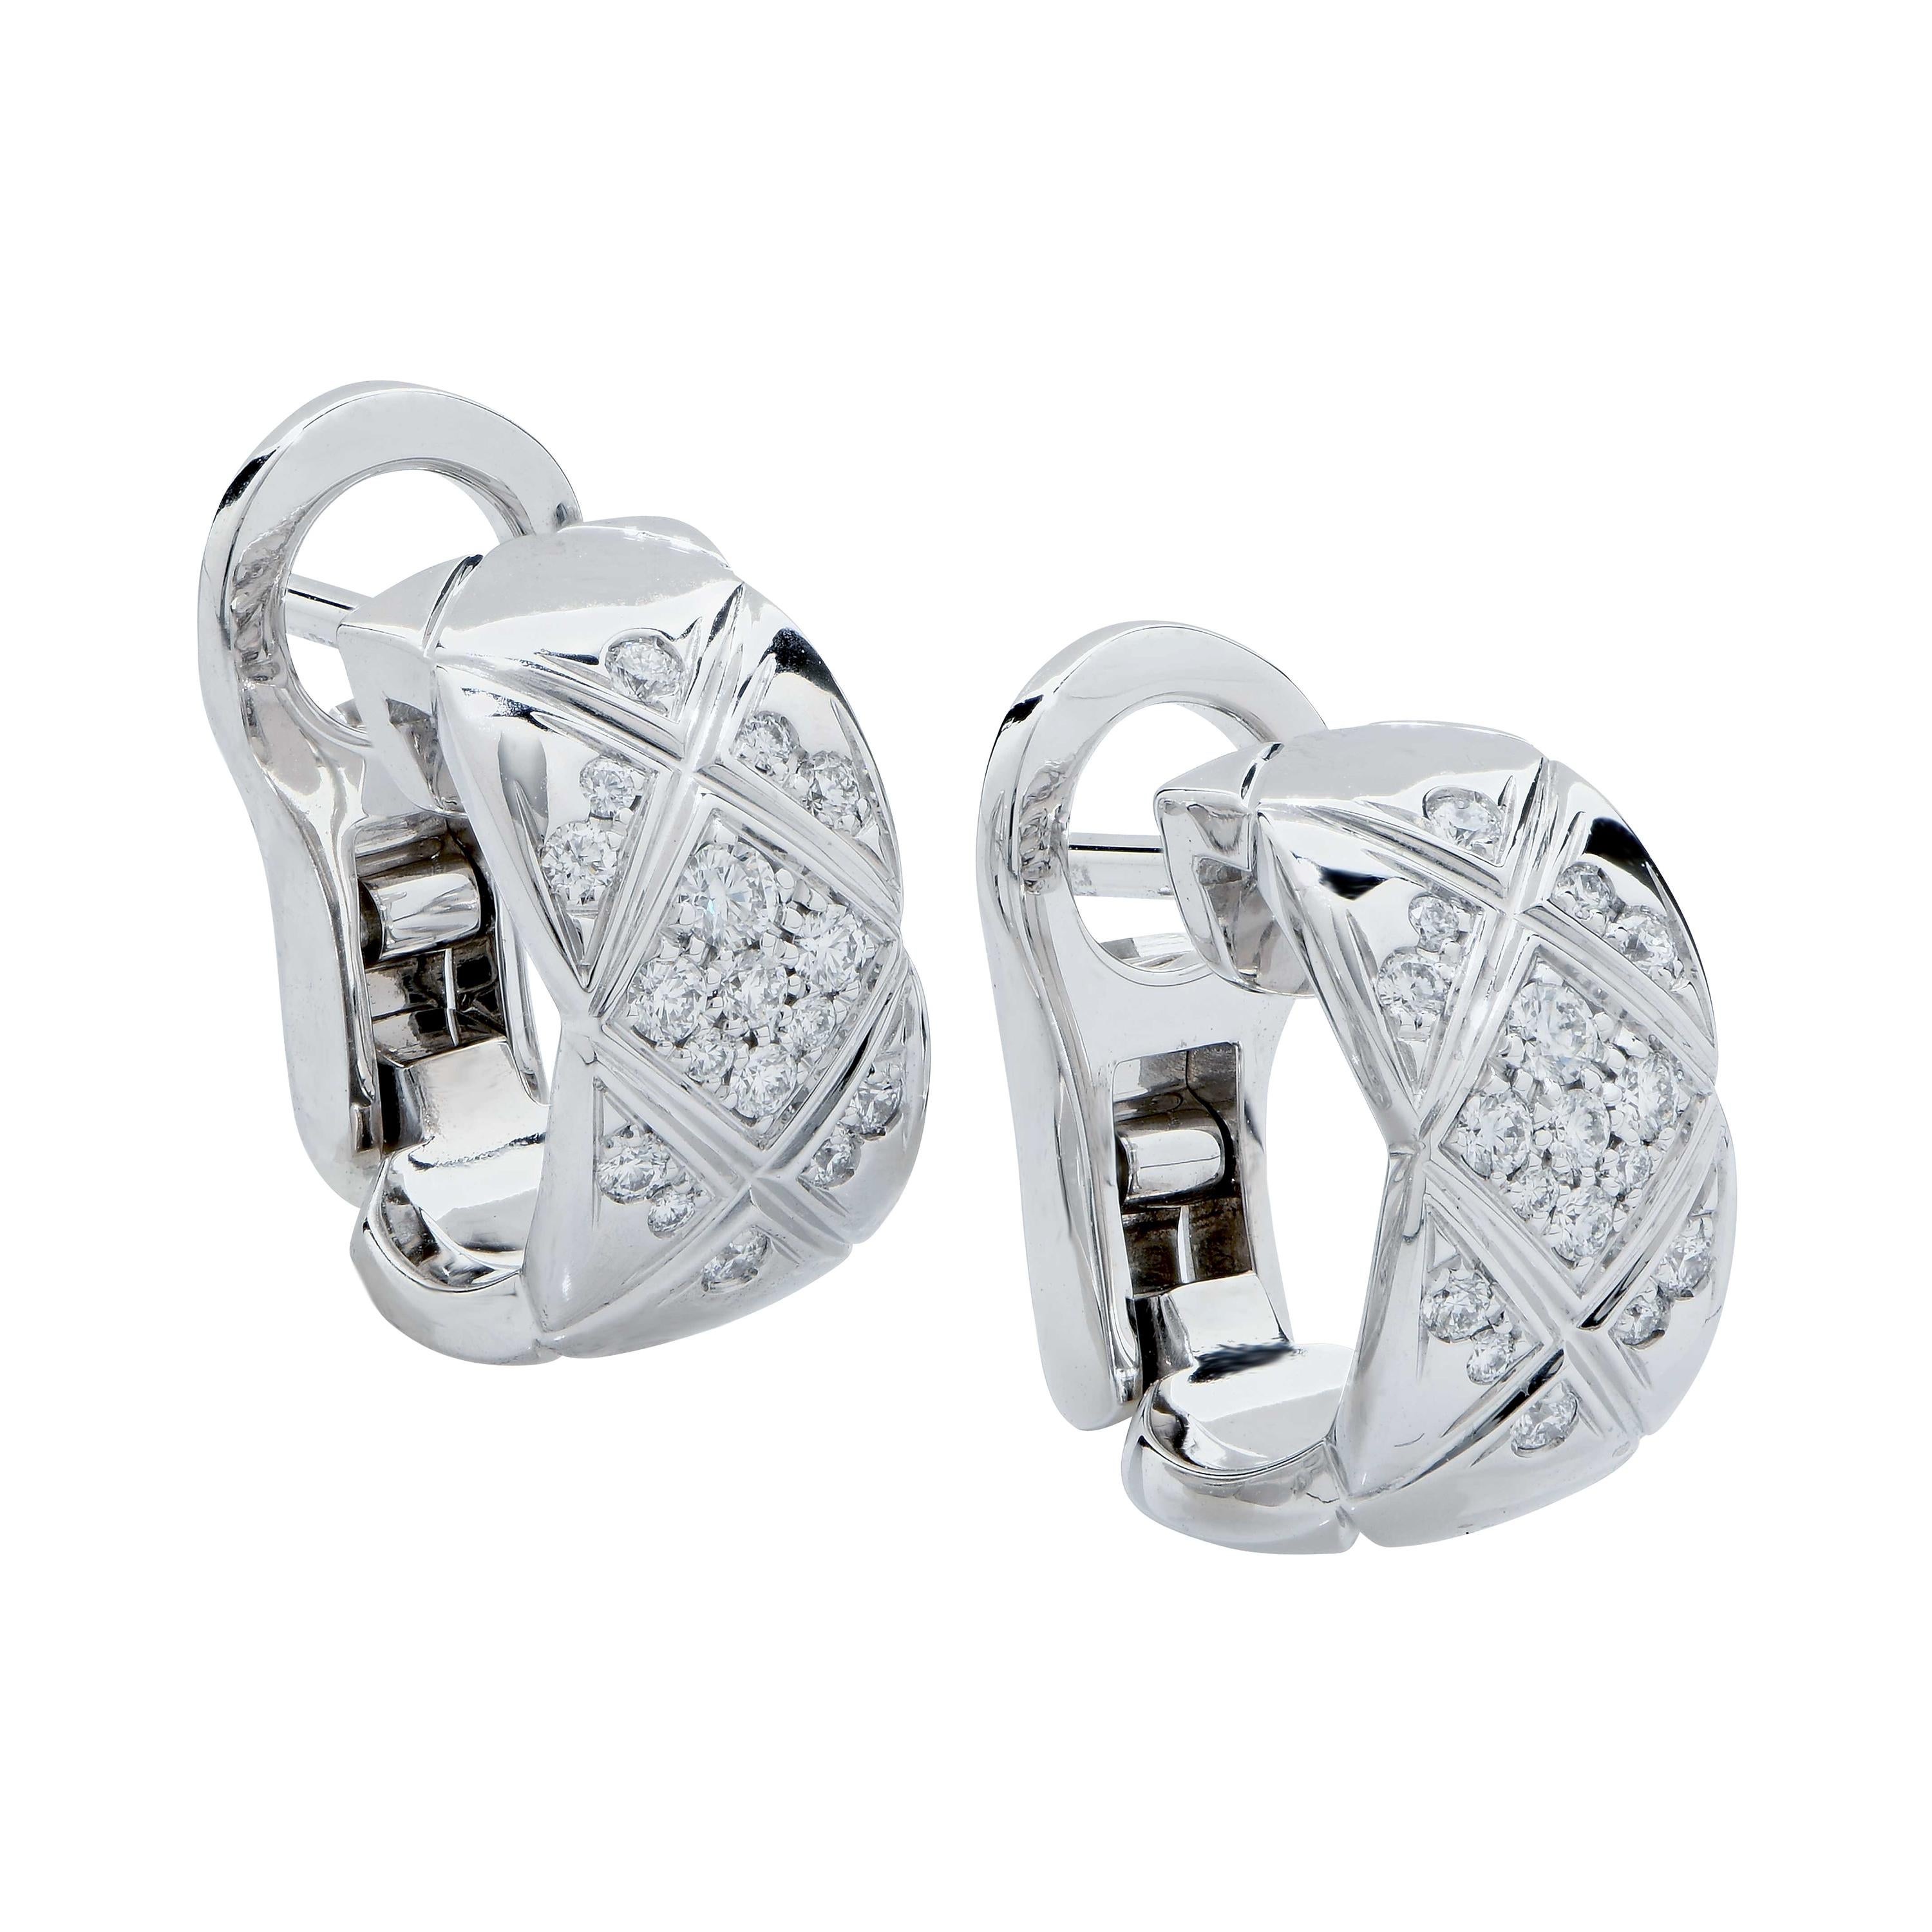 Chanel Coco Crush Diamond and 18 Karat White Gold Earrings at